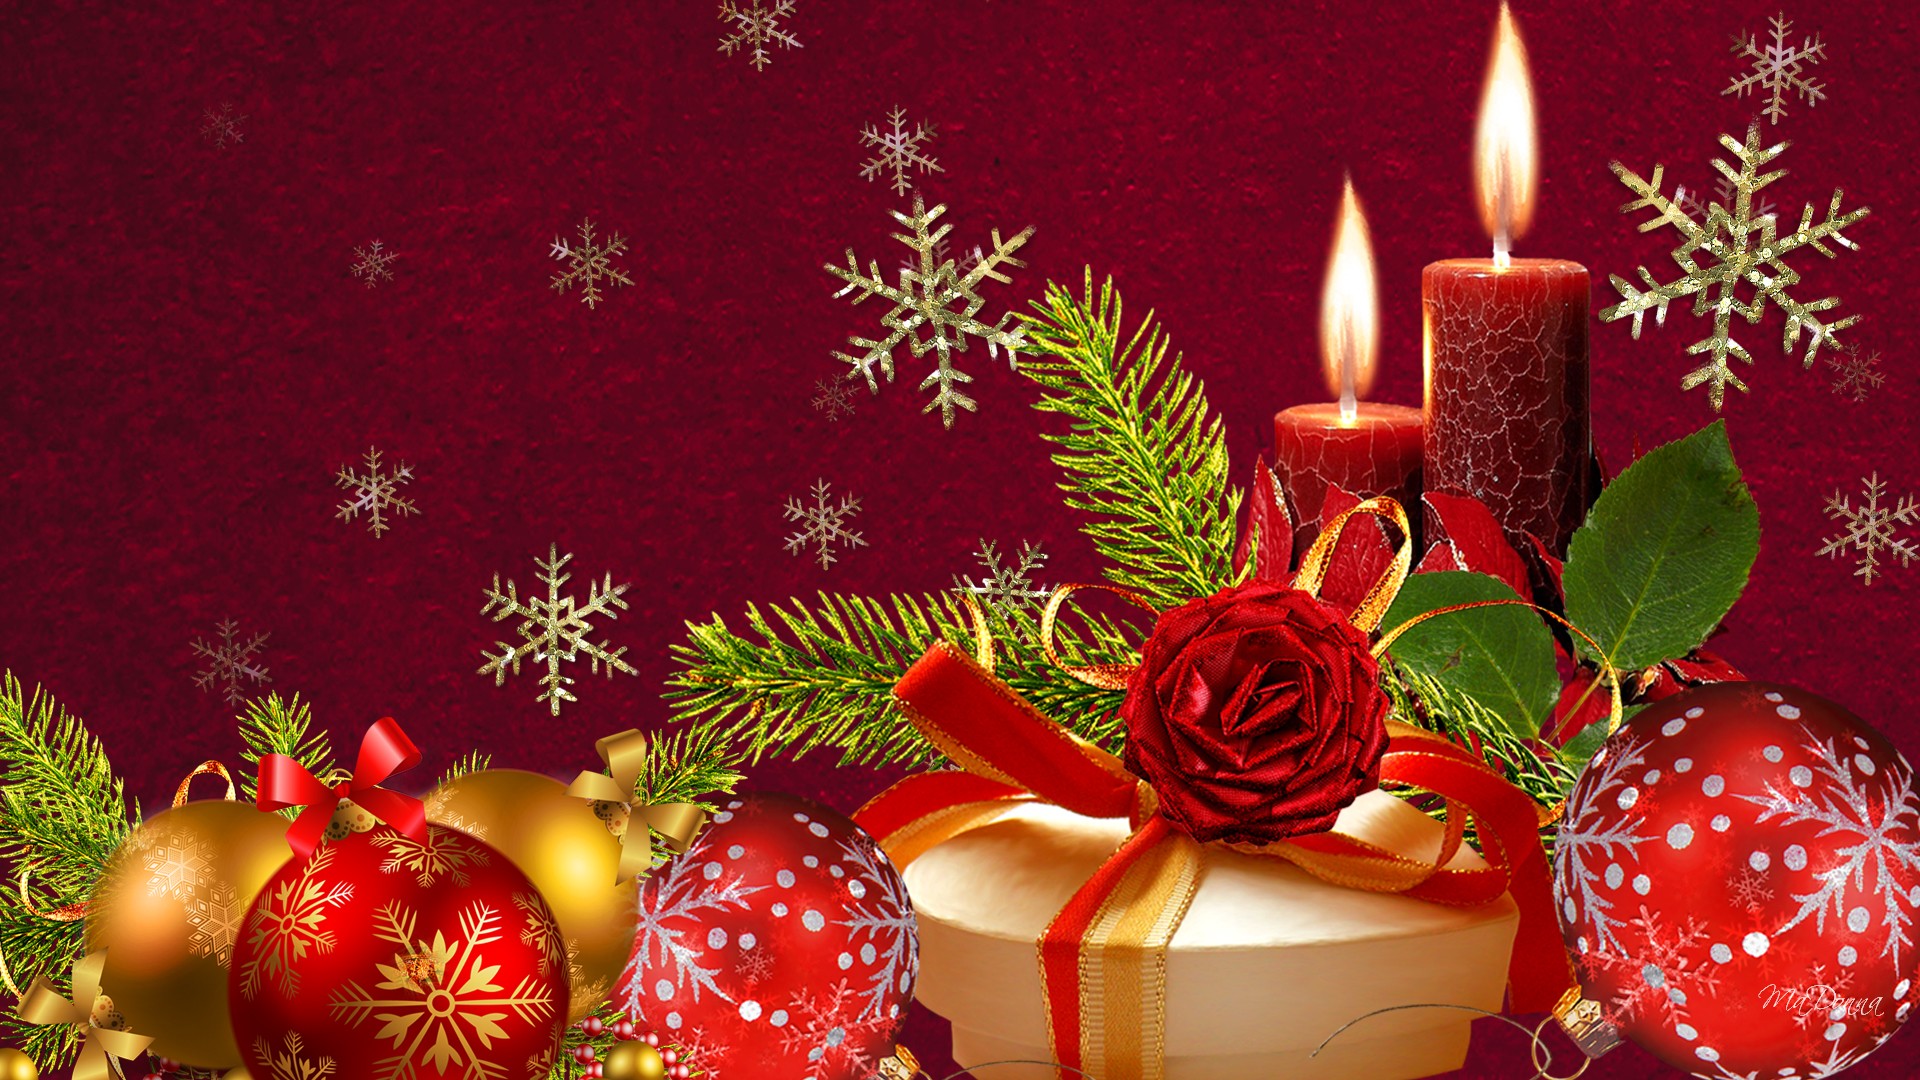 red and green christmas background 1920x1080